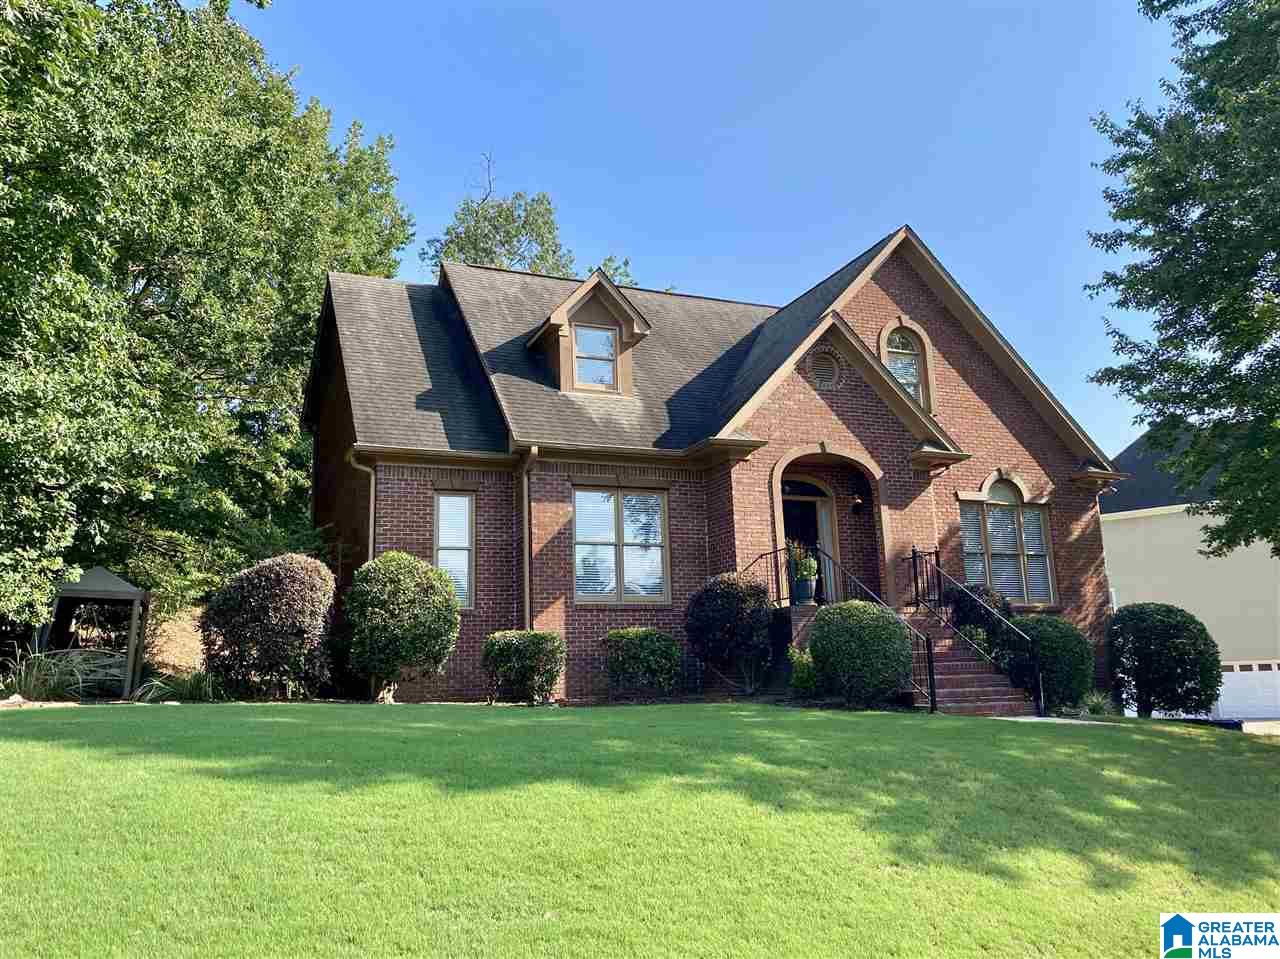 890365 1 From Bluff Park to Gardendale - Open Houses for Aug. 14-16